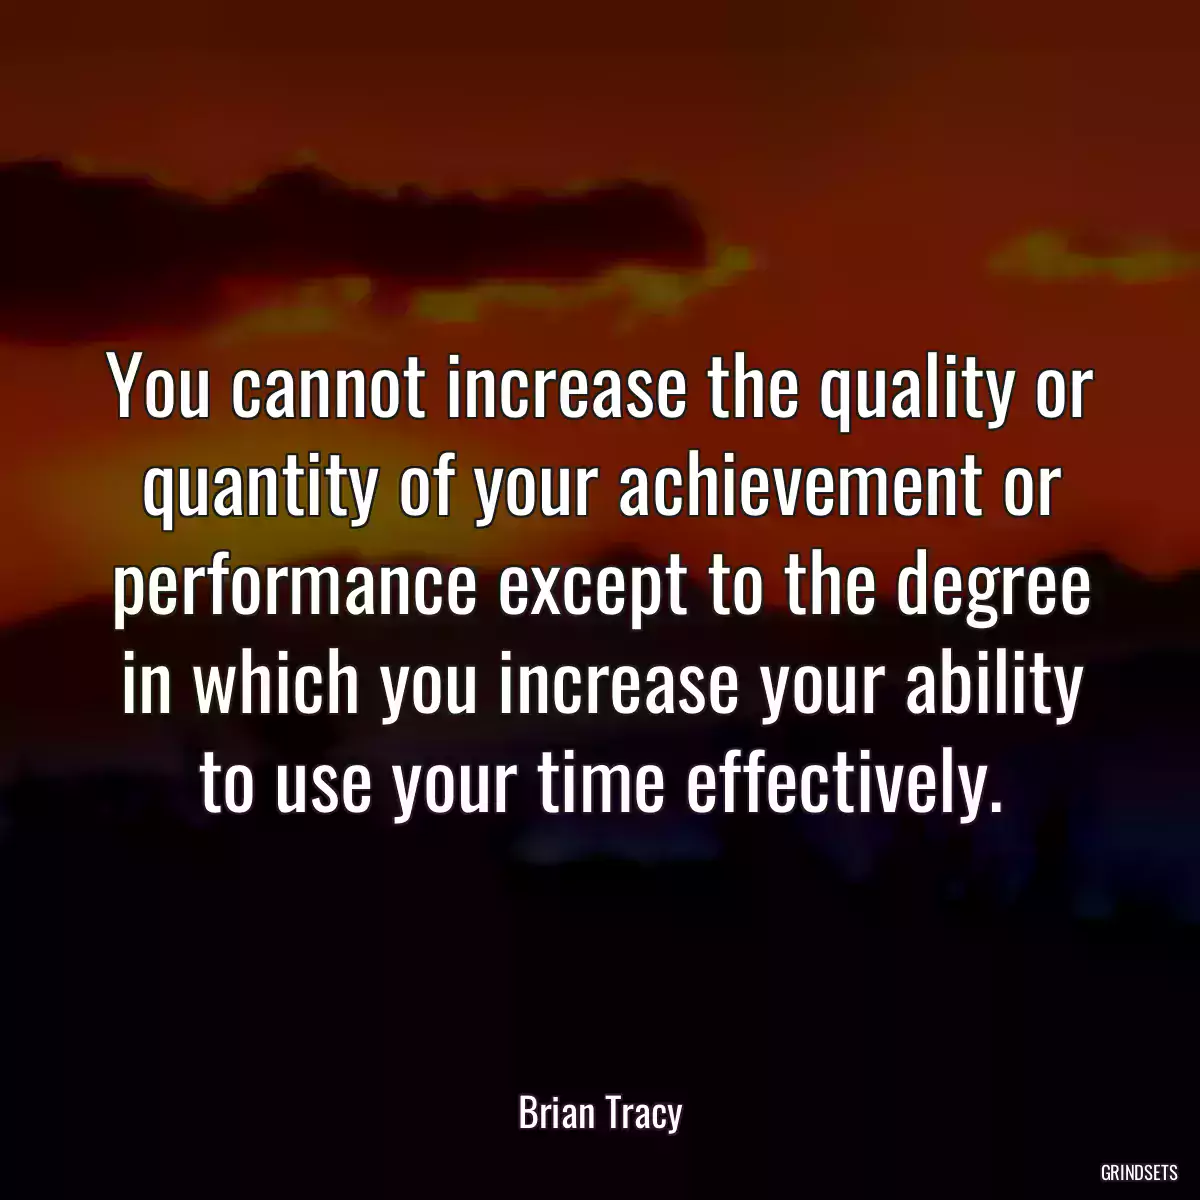 You cannot increase the quality or quantity of your achievement or performance except to the degree in which you increase your ability to use your time effectively.